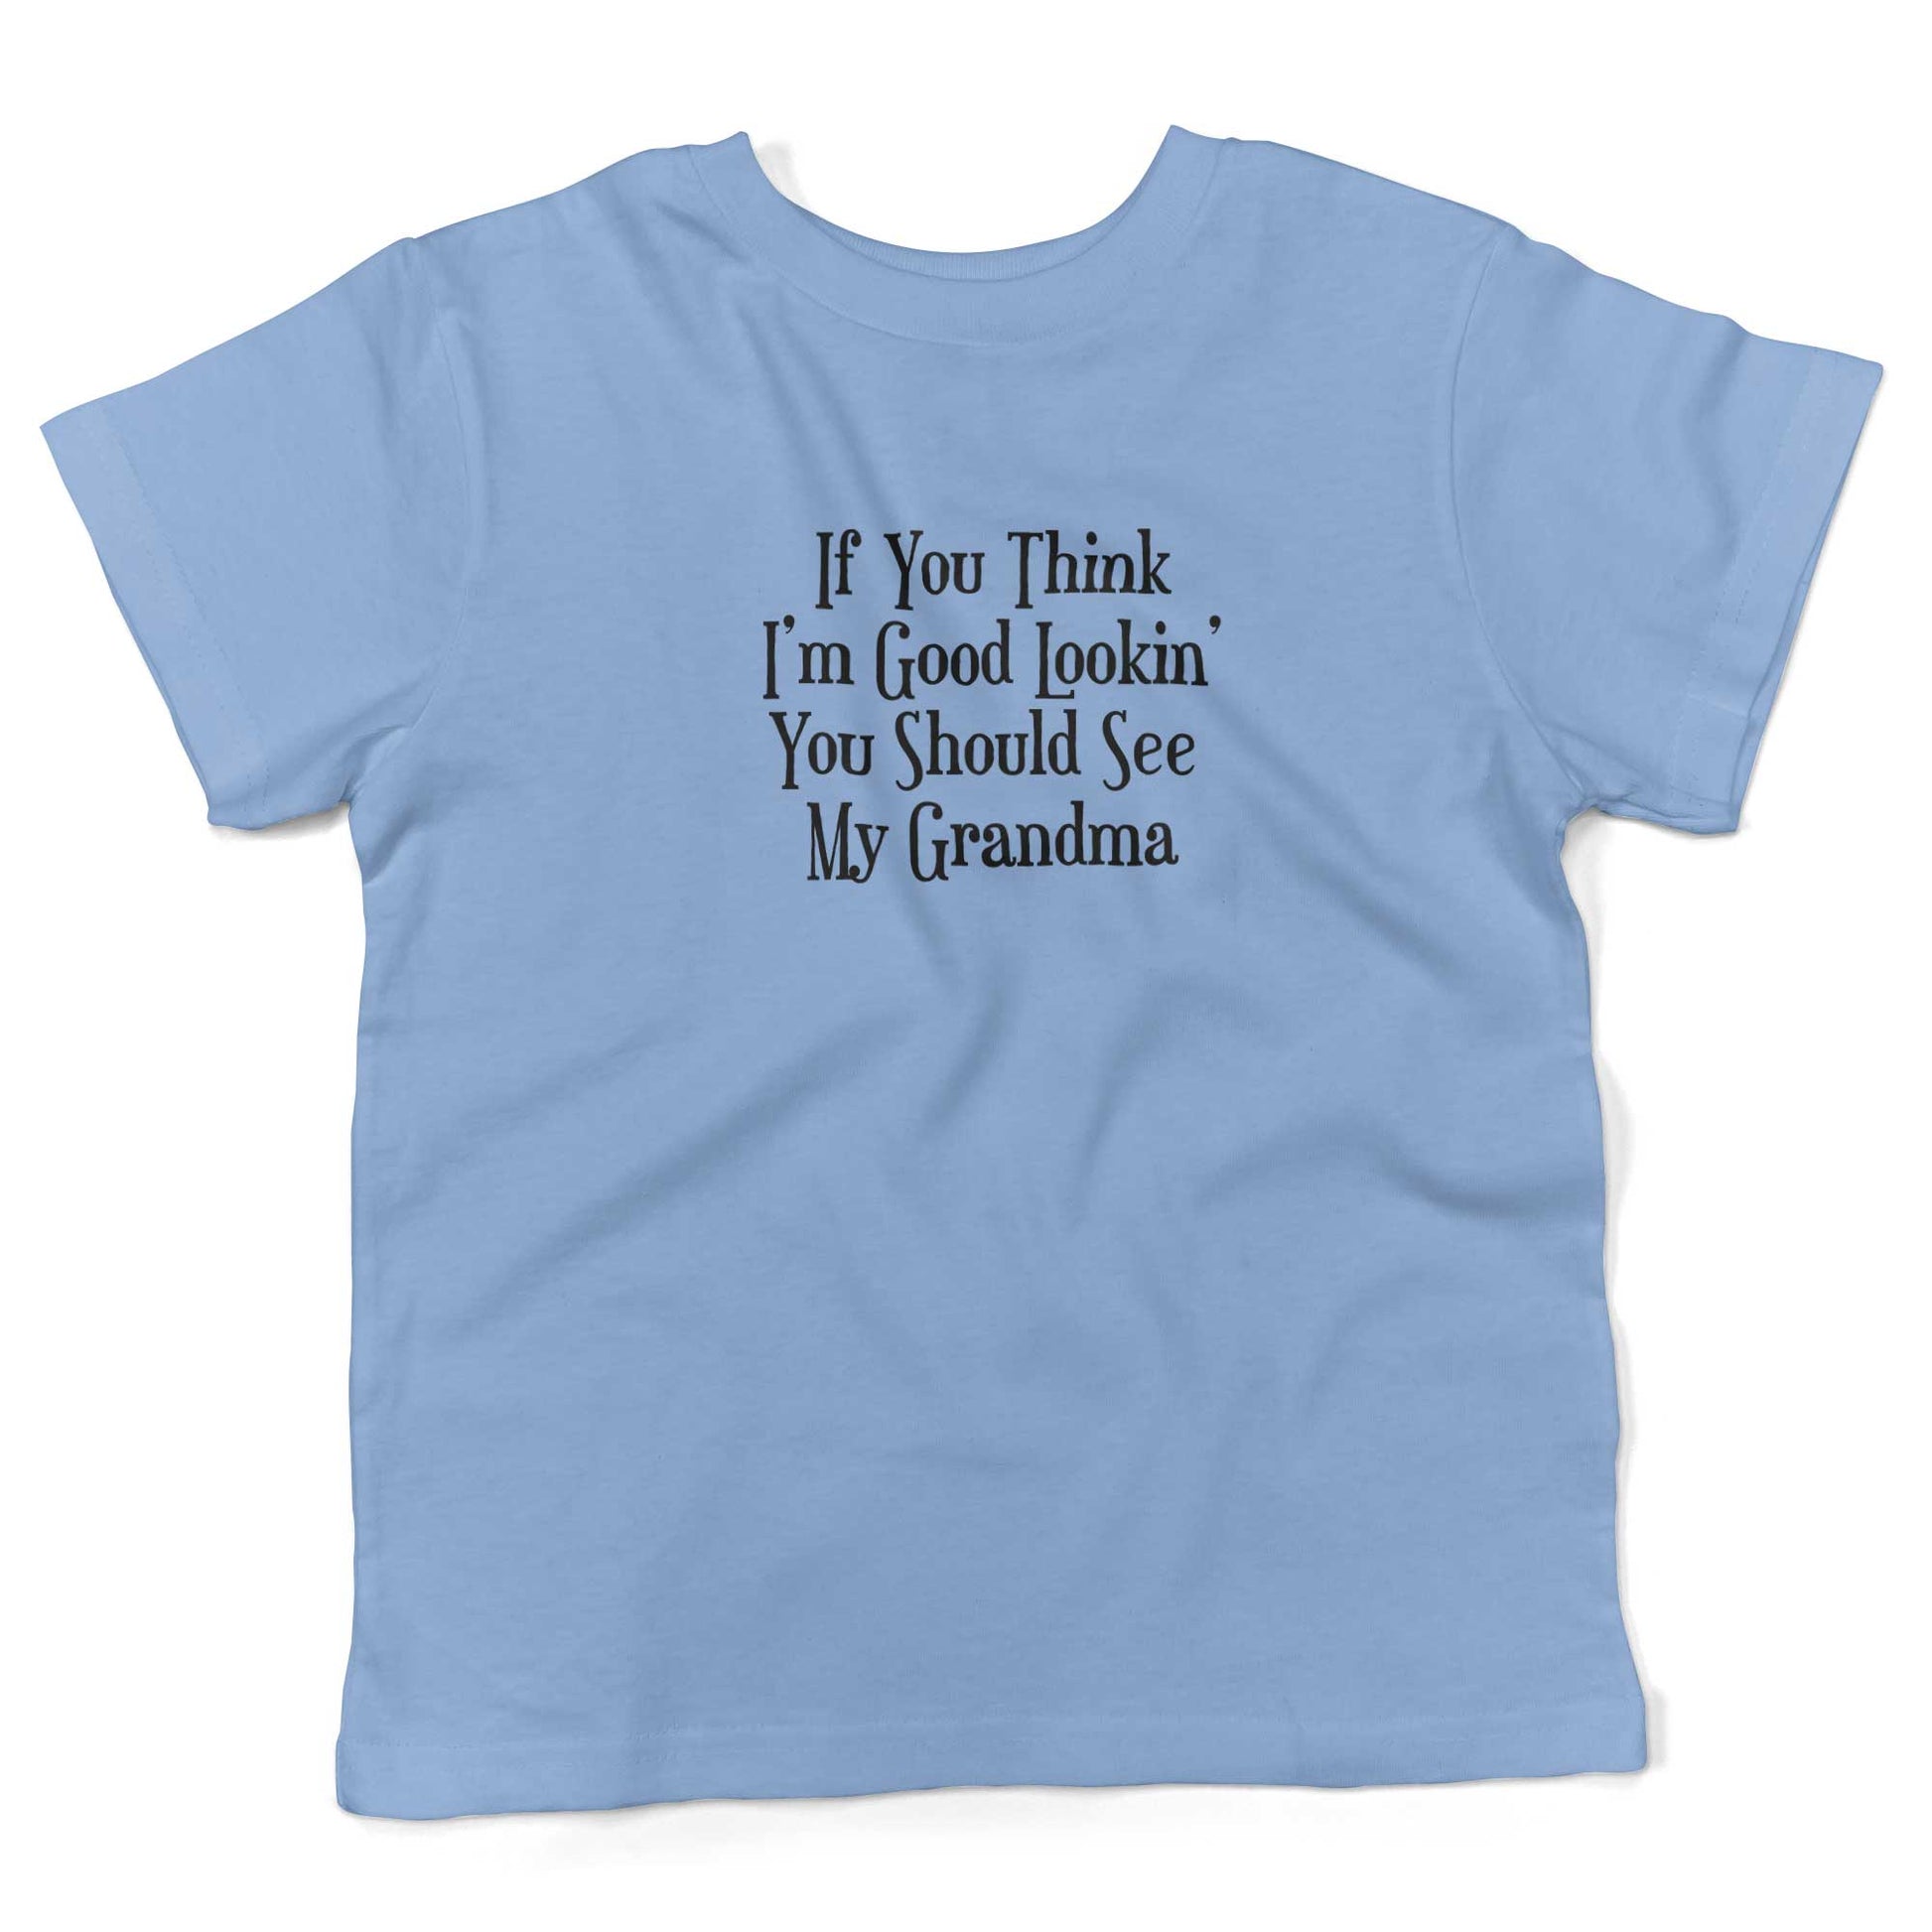 If You Think I'm Good Lookin', You Should See My Grandma Toddler Shirt-Organic Baby Blue-2T